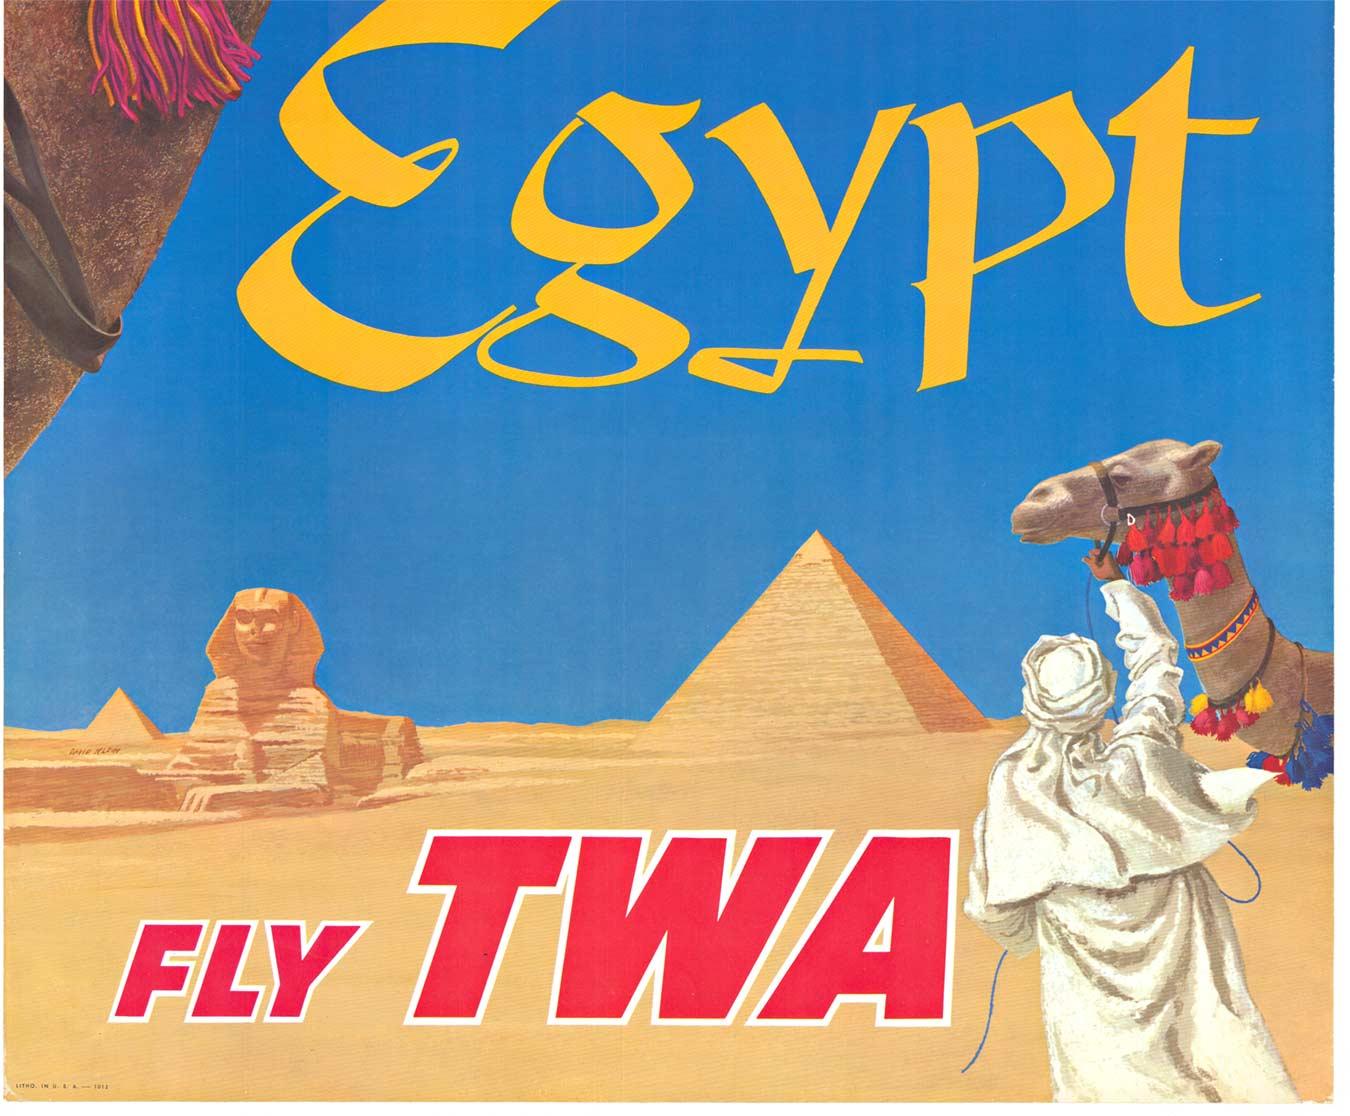 Original Egypt Fly TWA Airlines vintage poster  - American Realist Print by David Klein